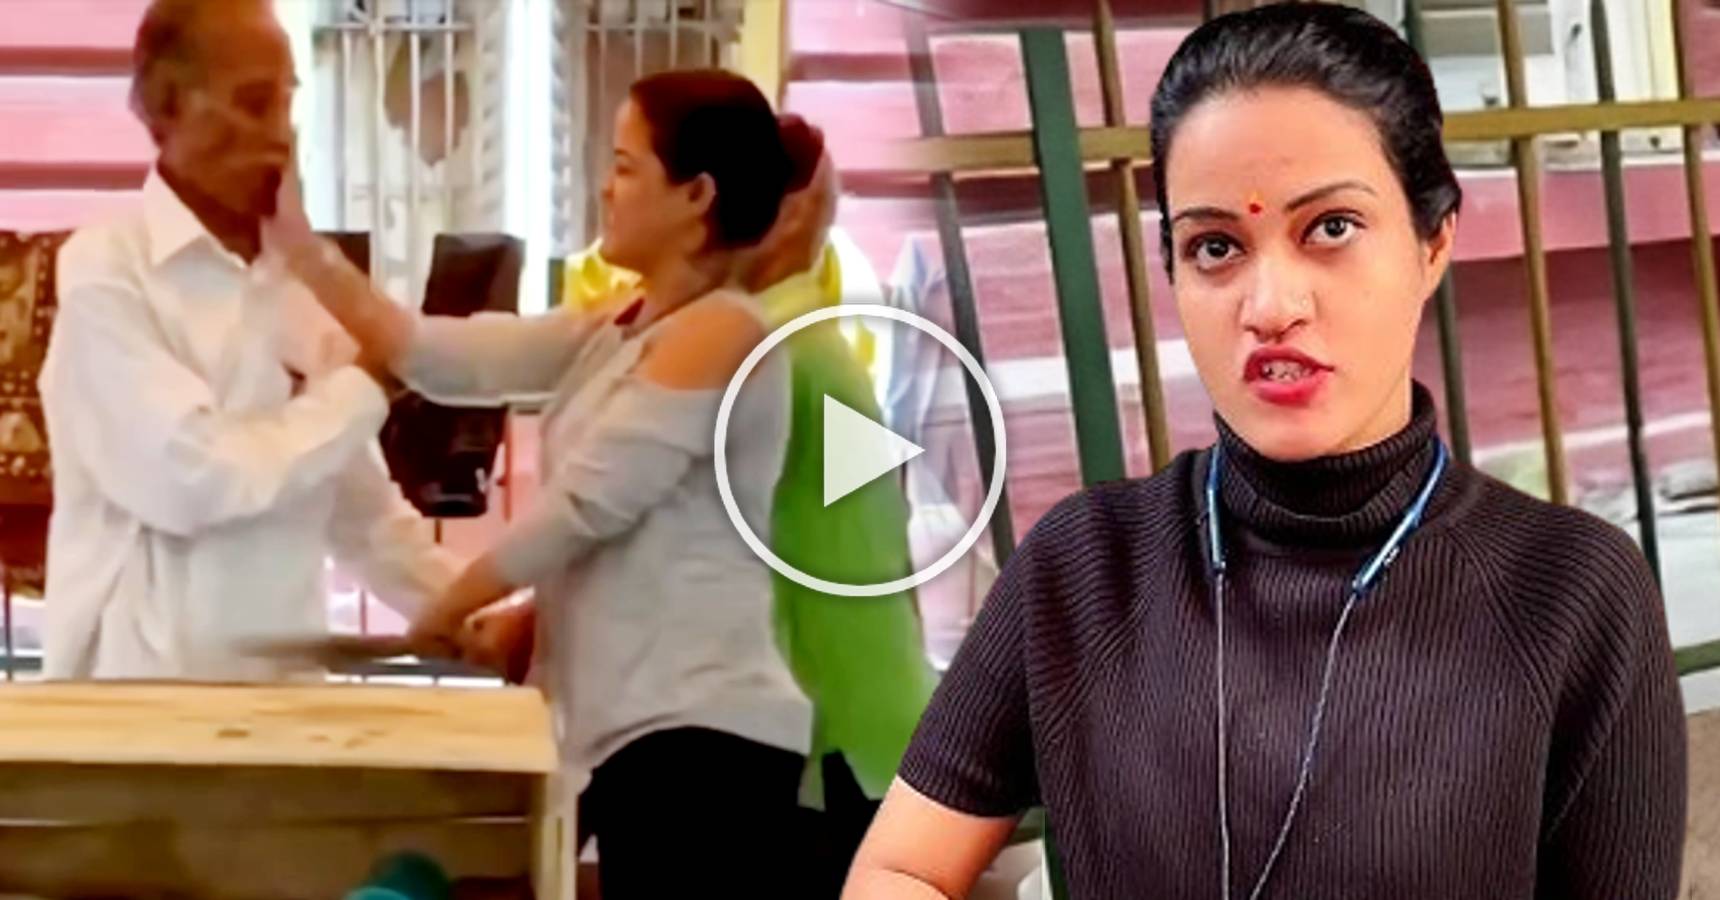 Smart didi Nandini slapped an old man in the market video goes viral on social media